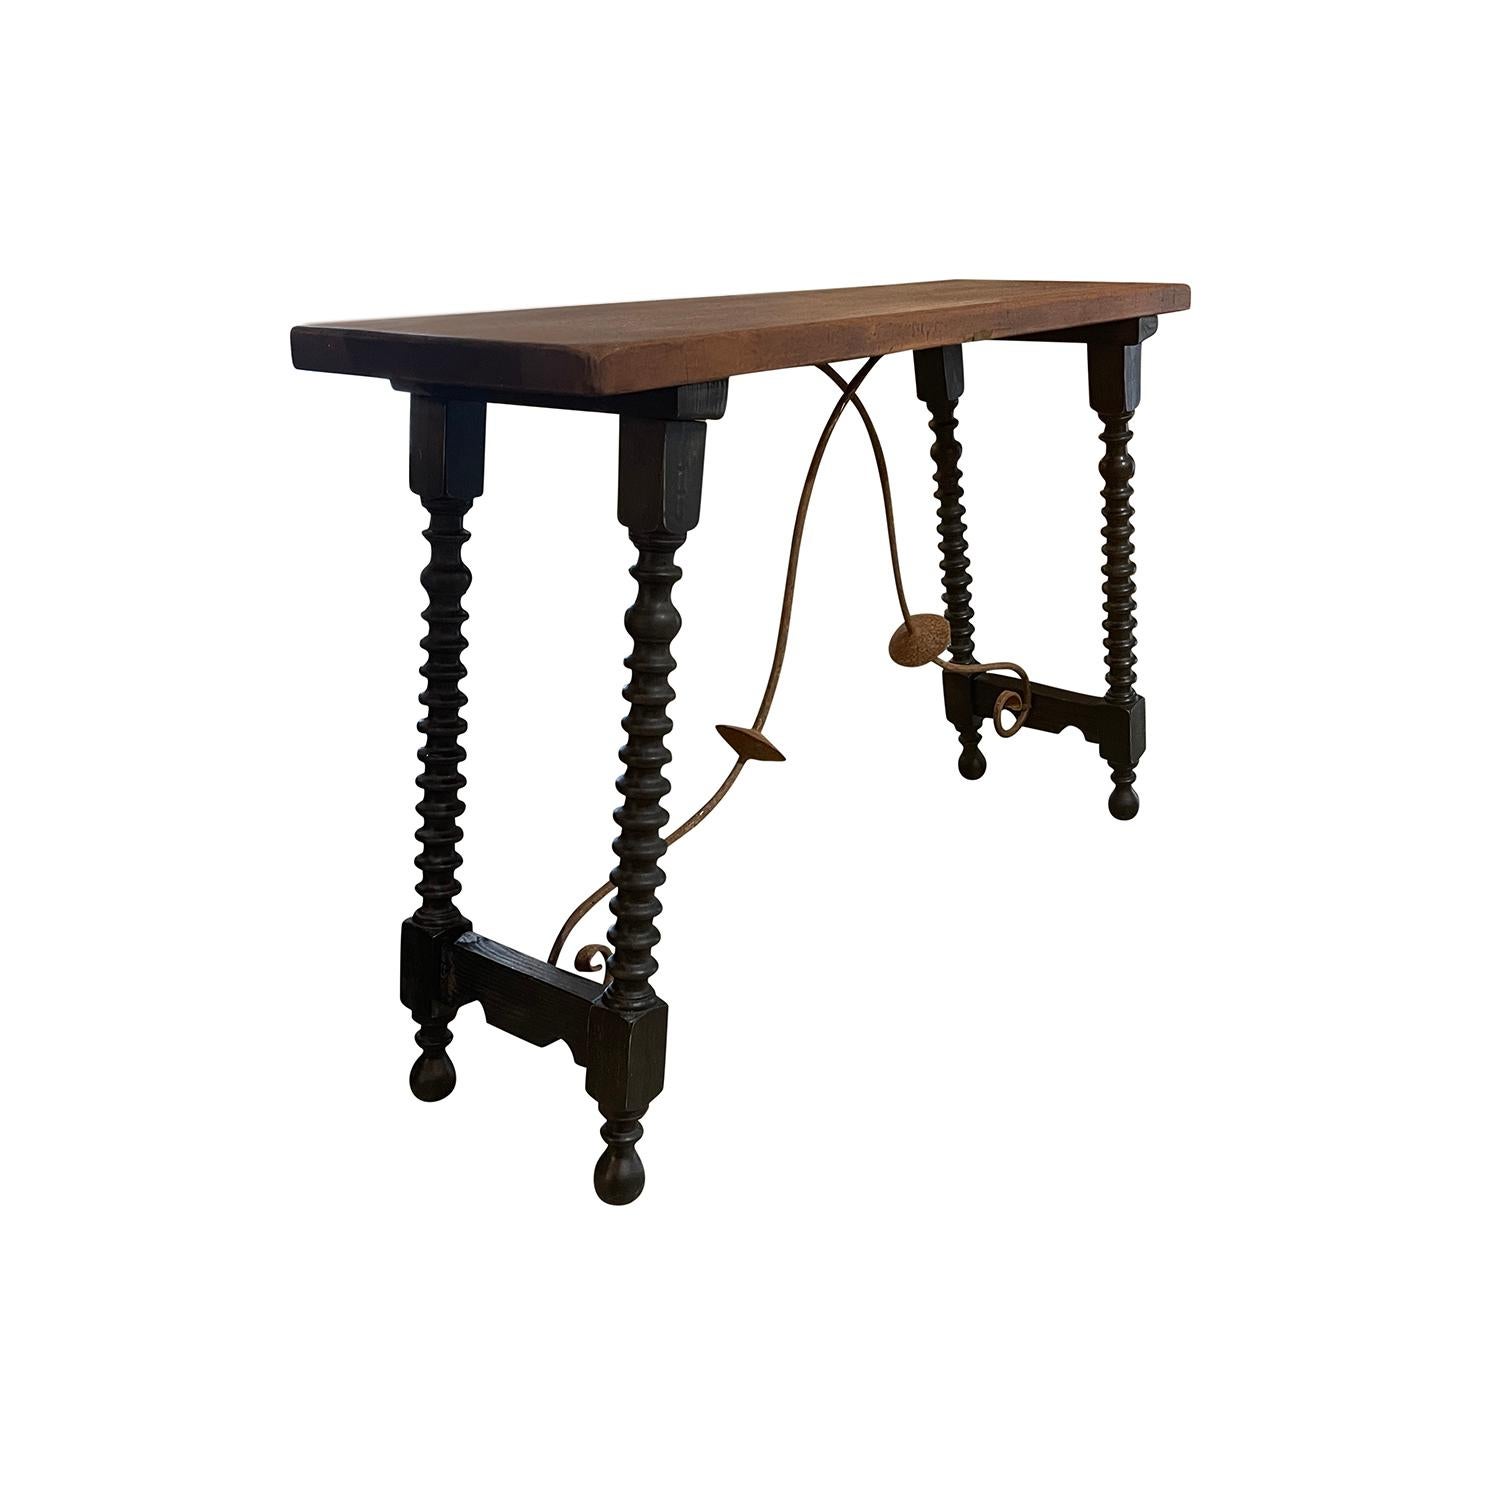 An antique 19th century Tuscan Renaissance style table or console is topped with a warm and rich colored rectangular Walnut table top, in good condition. The table base has twisted hand turned legs in Walnut refinished with dark wax. The wooden base